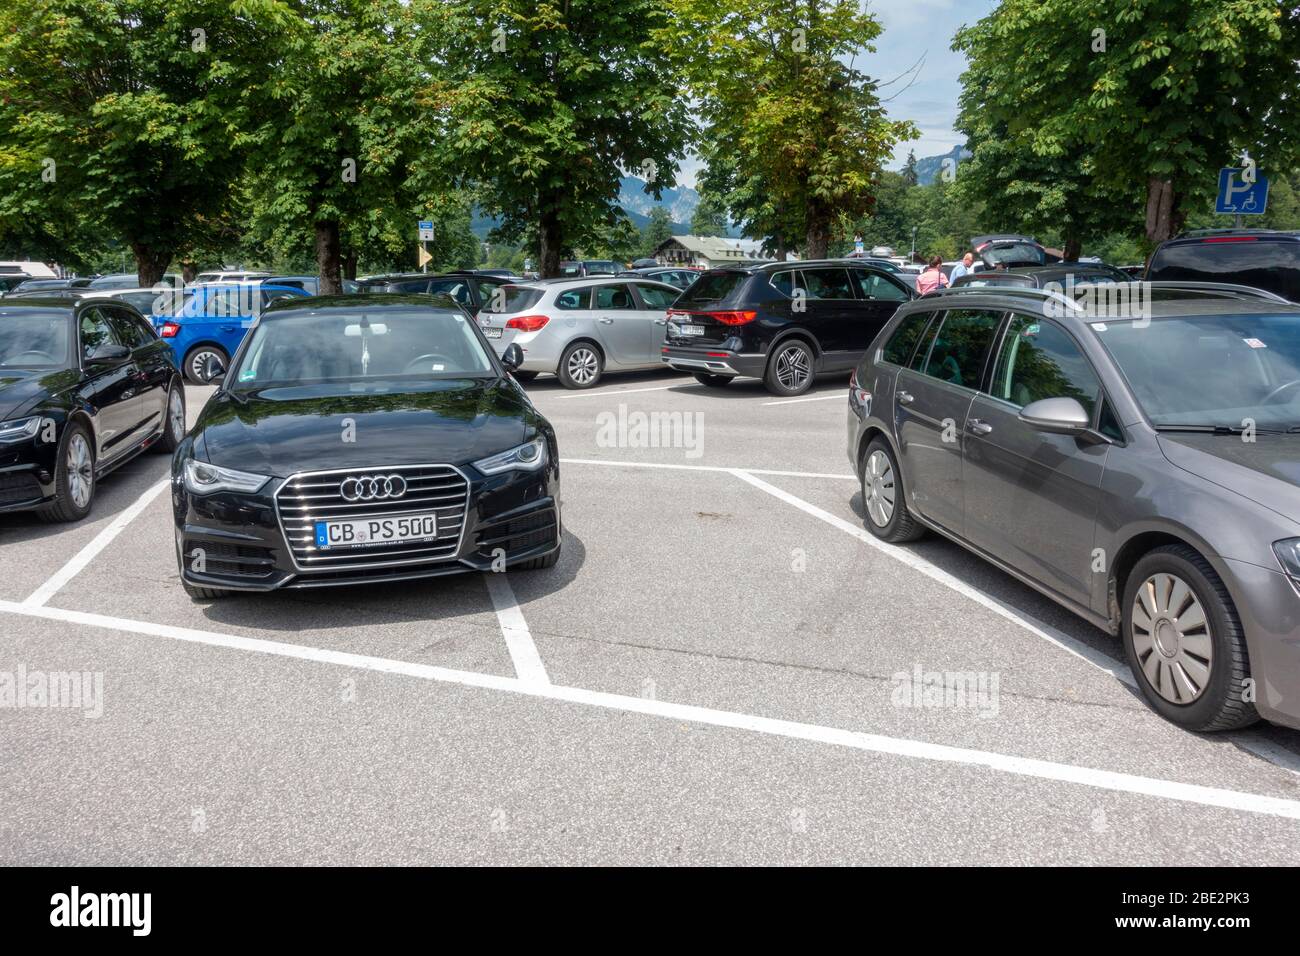 An example of either poor/bad/selfish parking or too thin parking bays in a packed car park in Konigssee, Bavaria, Germany. Stock Photo